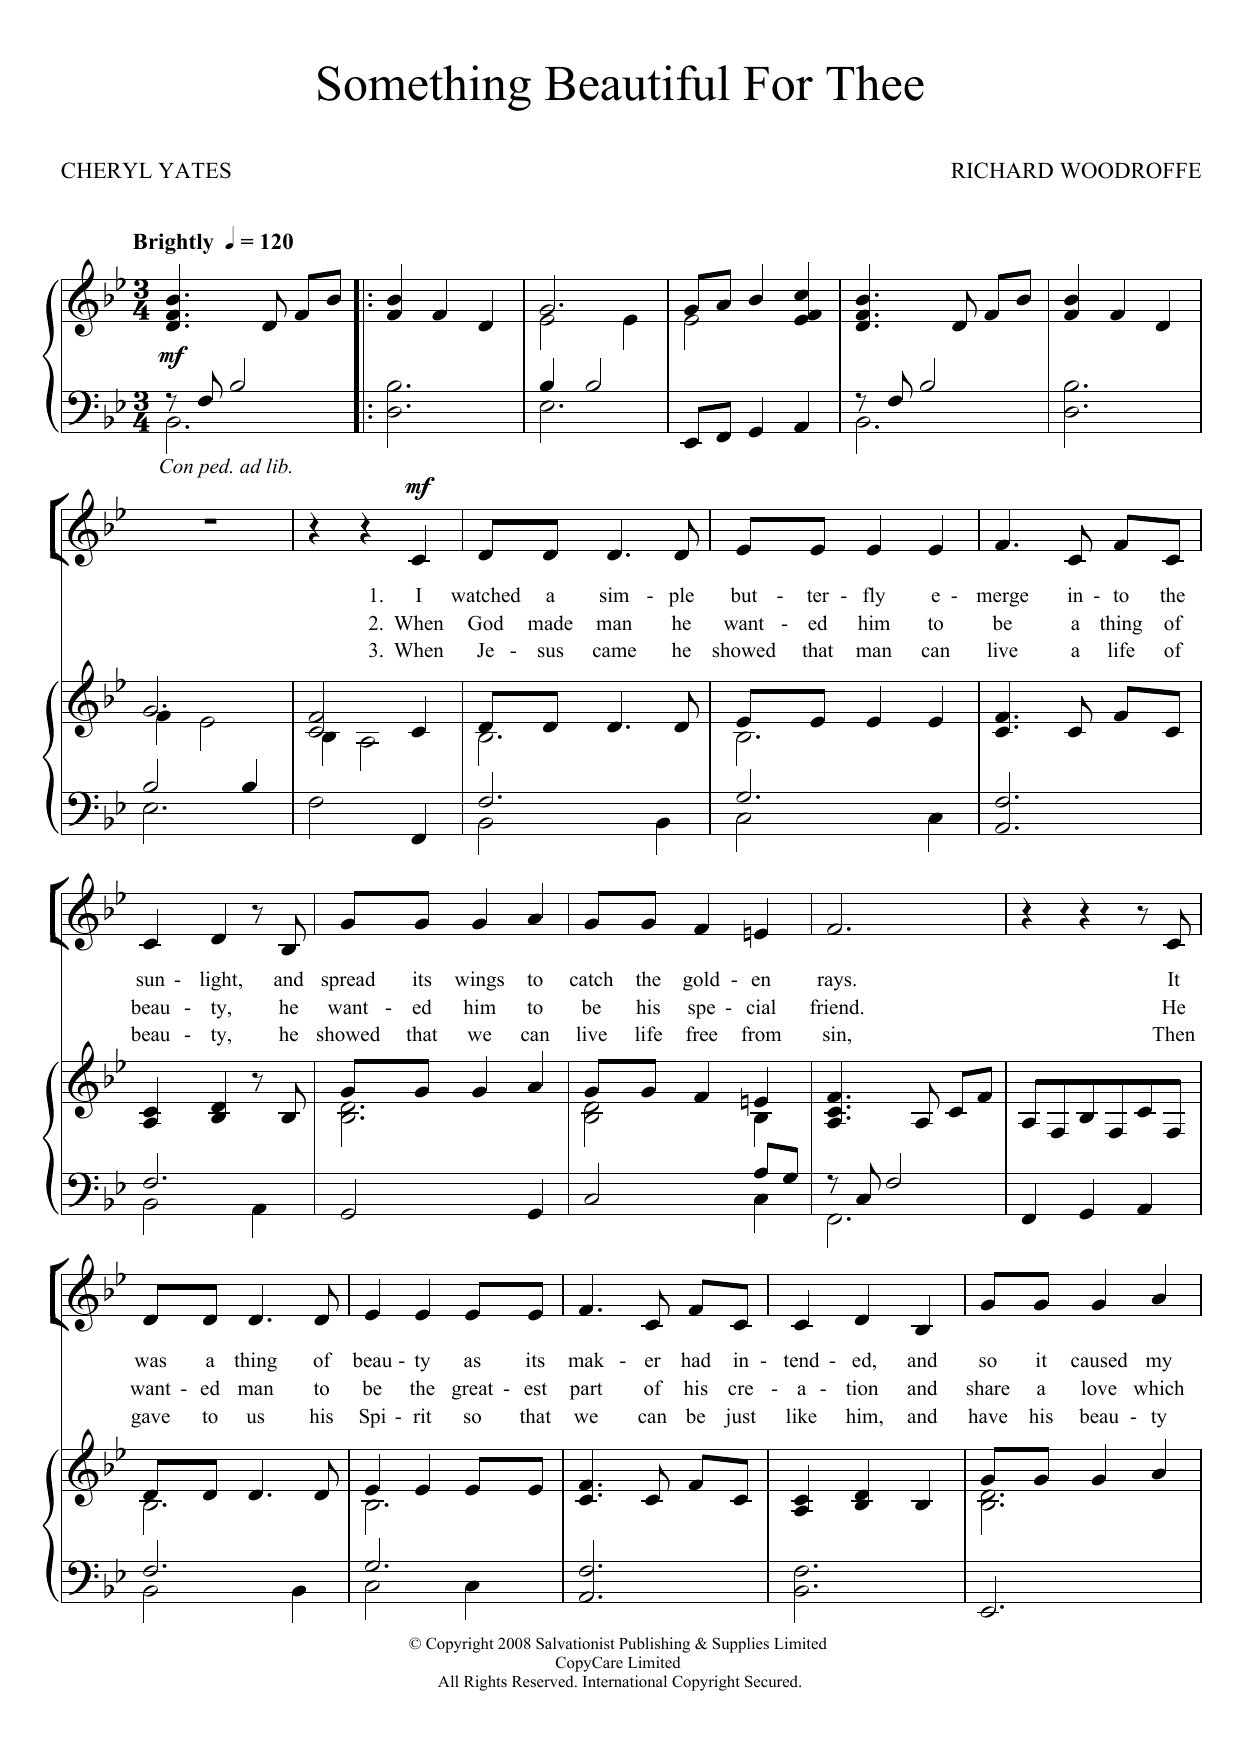 Download The Salvation Army Something Beautiful For Thee Sheet Music